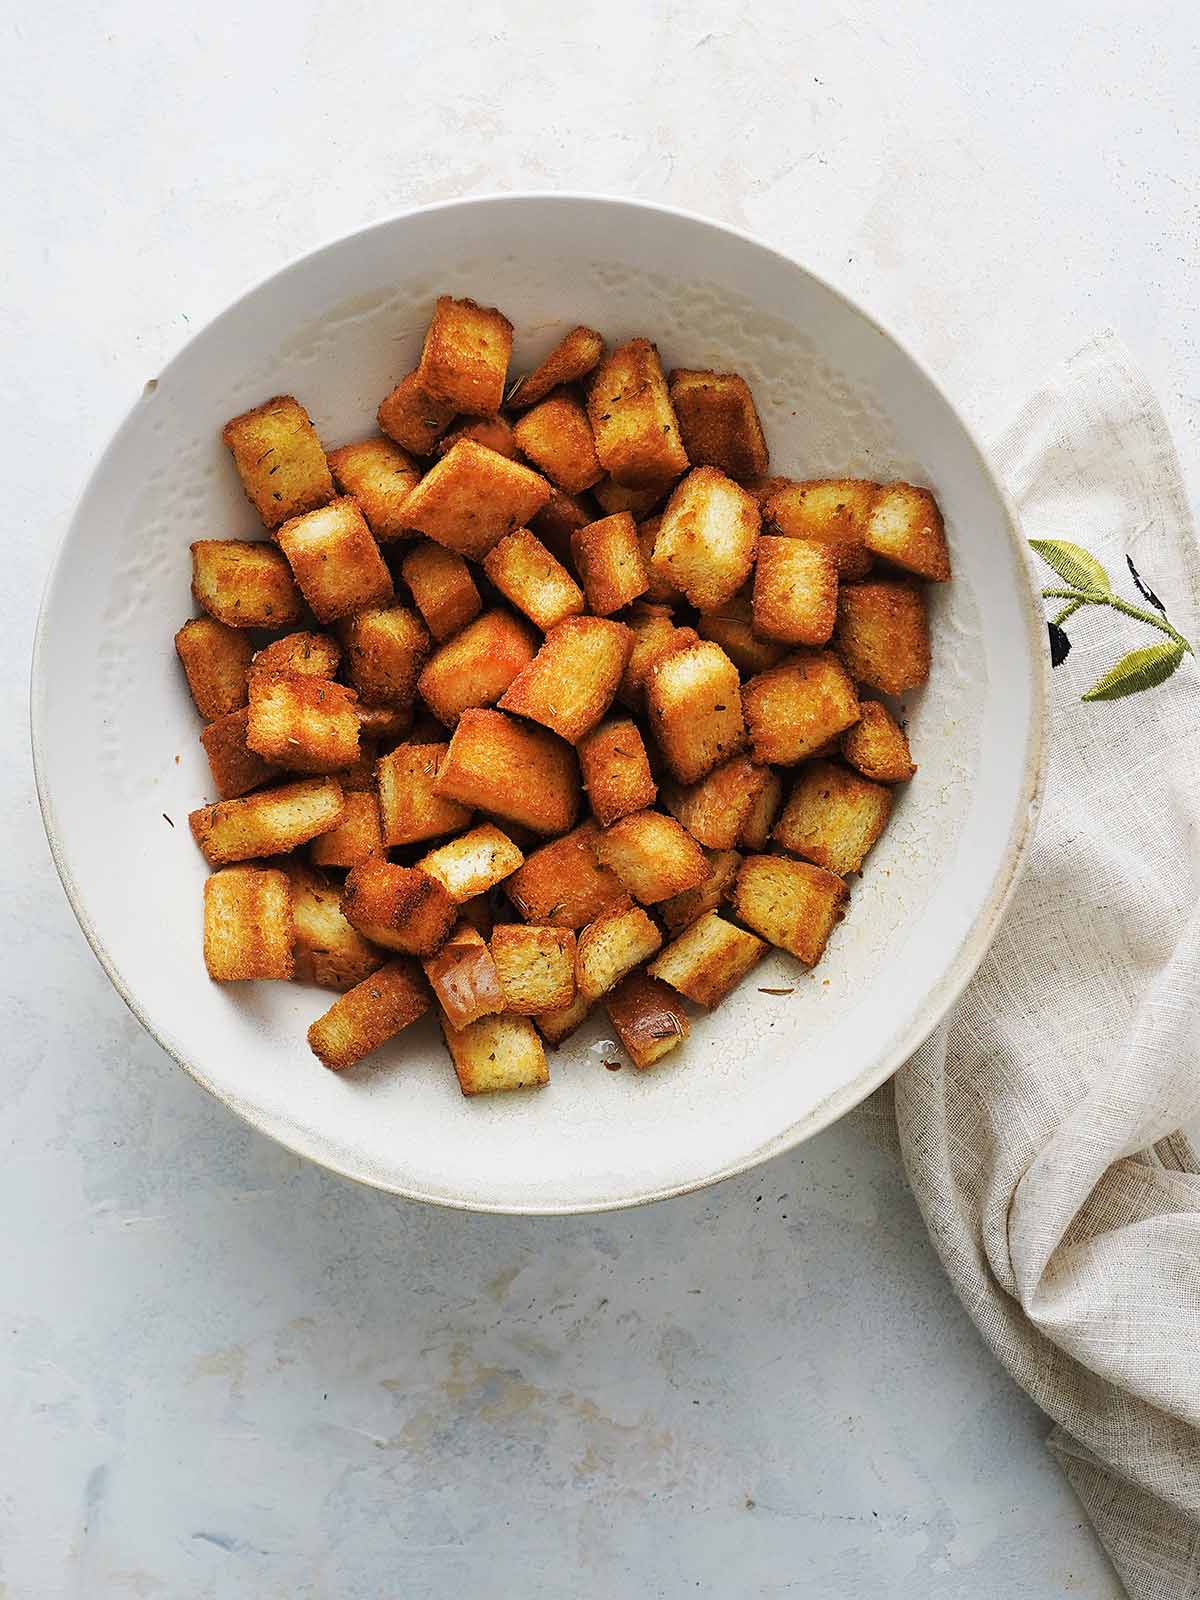 Cubed croutons in a bowl.